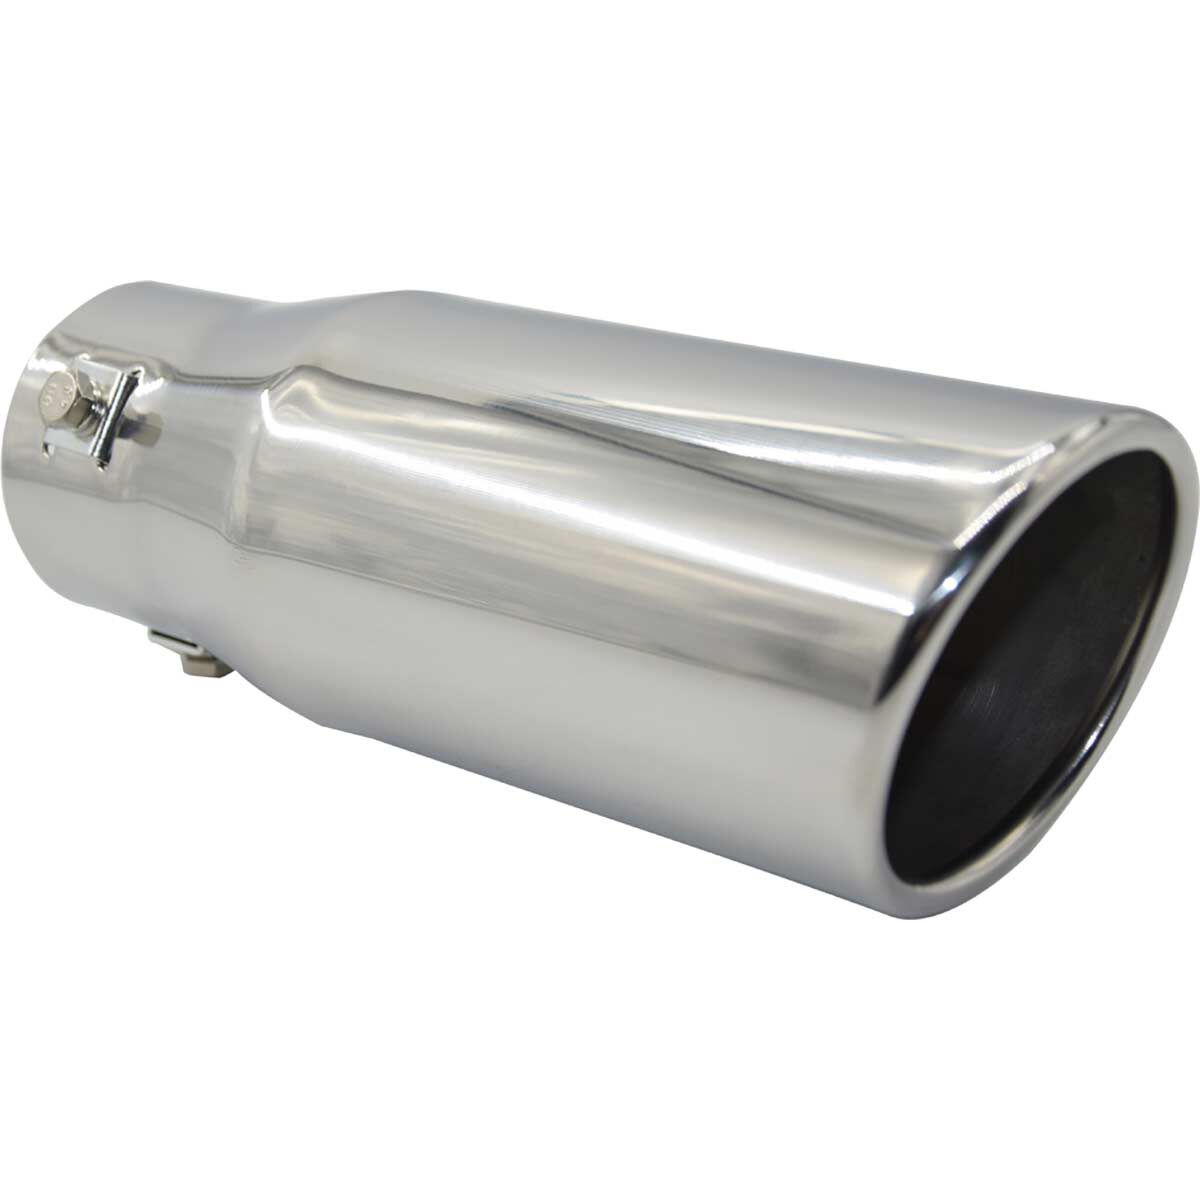 Car Exhaust Tip Inlet 62mm 2.5inch Outlet 86mm 3.5inch Black Universal Stainless Steel Tail Muffler Pipe 